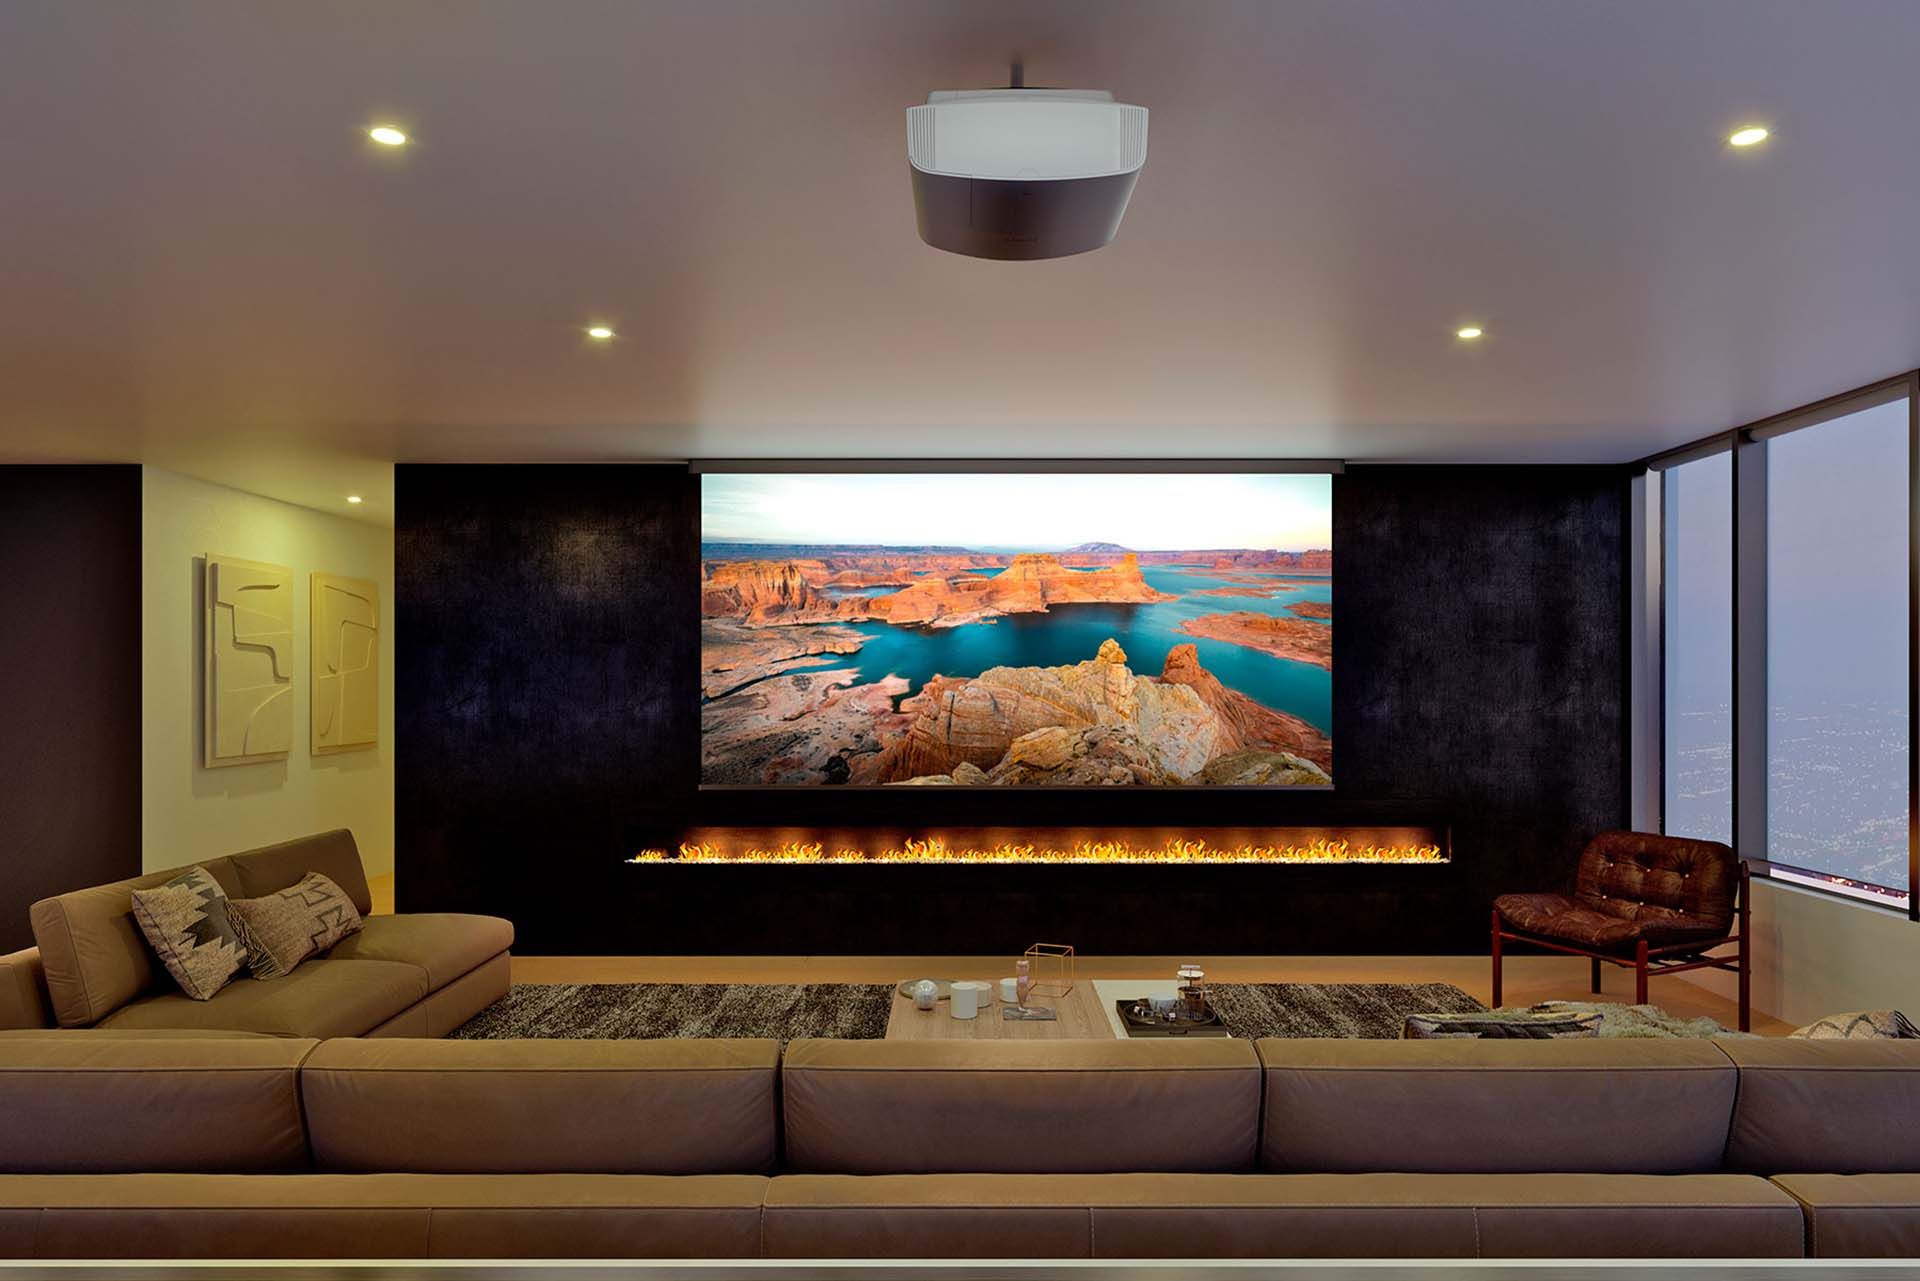 Sony Home Theater with wooden walls and ceiling in neutral colors